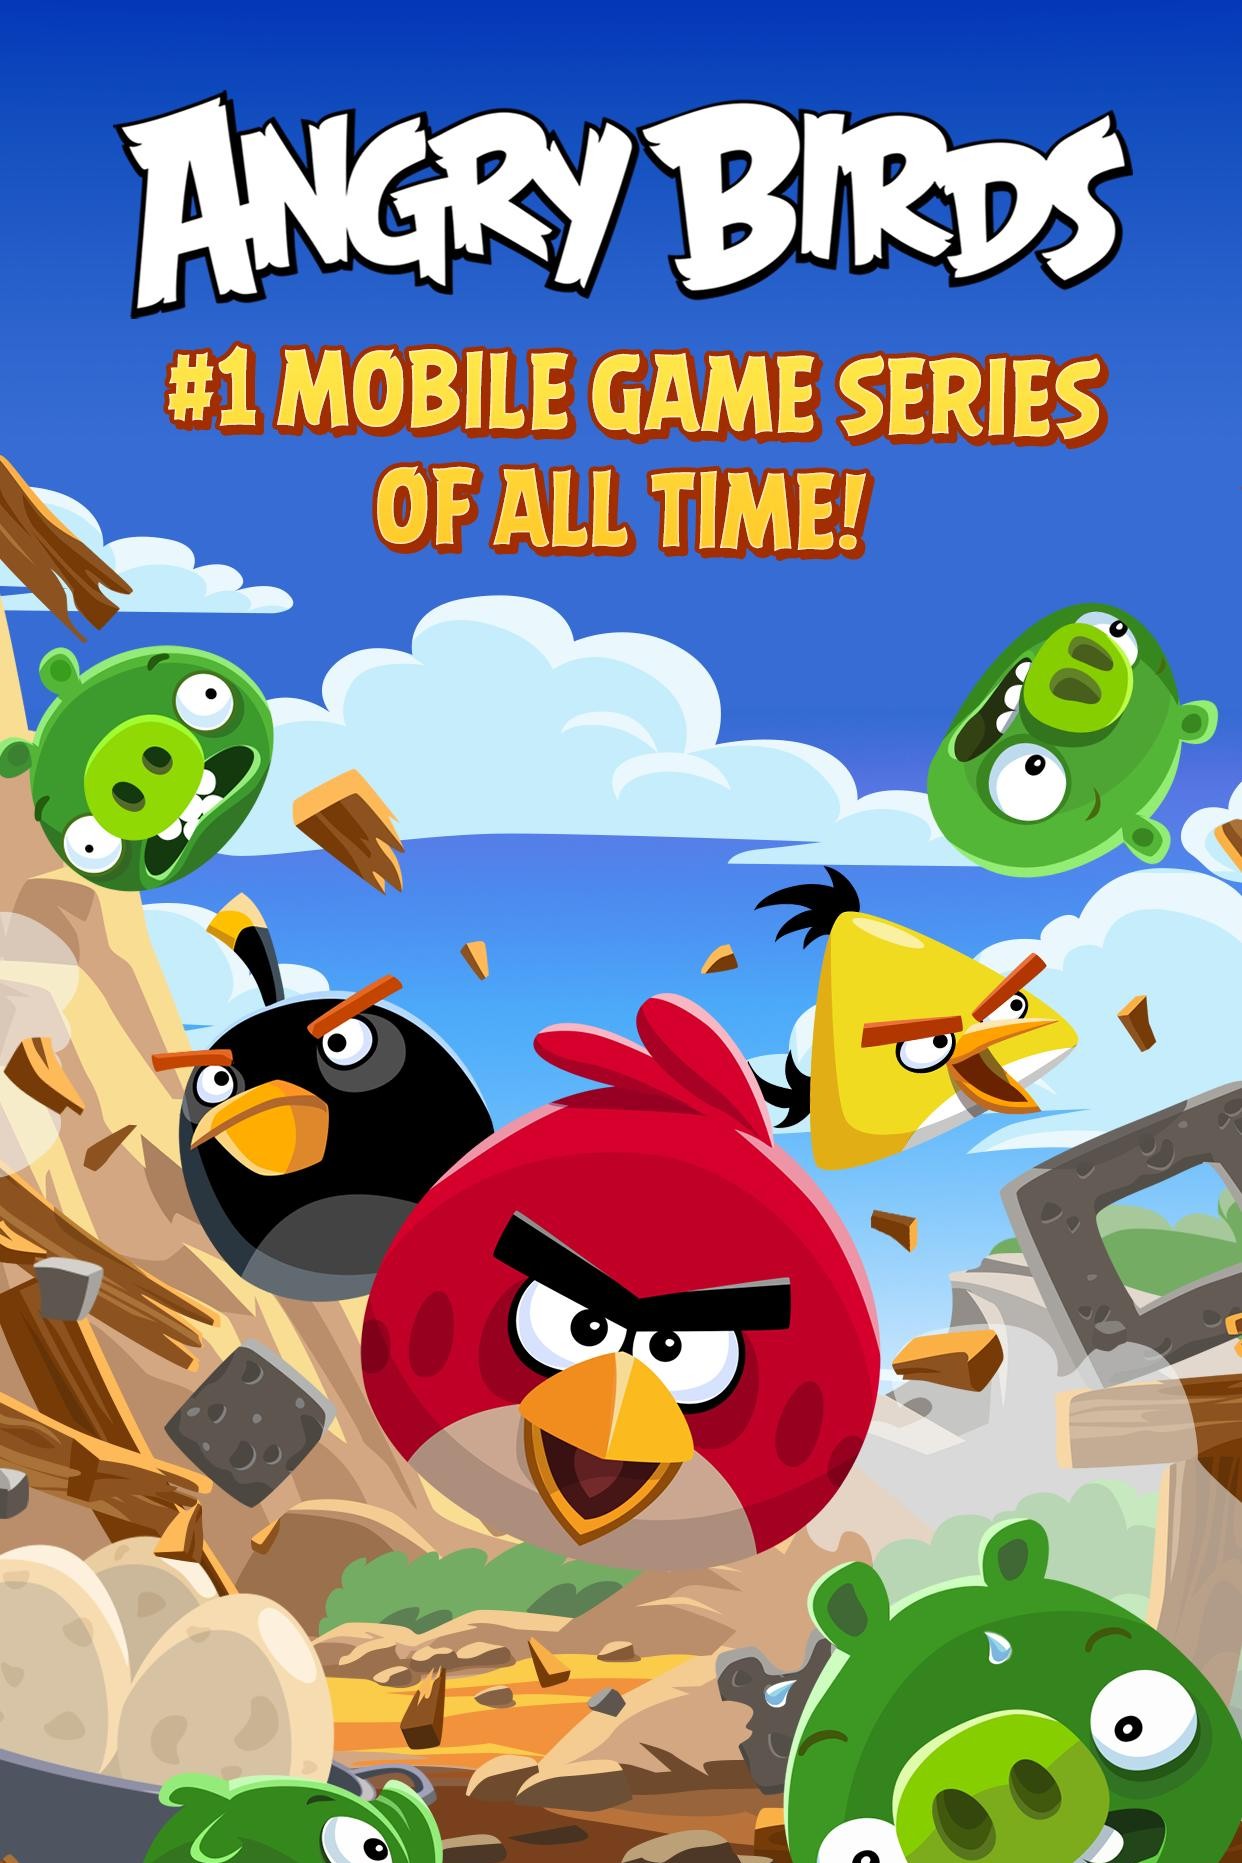 Is Angry Birds deterministic?